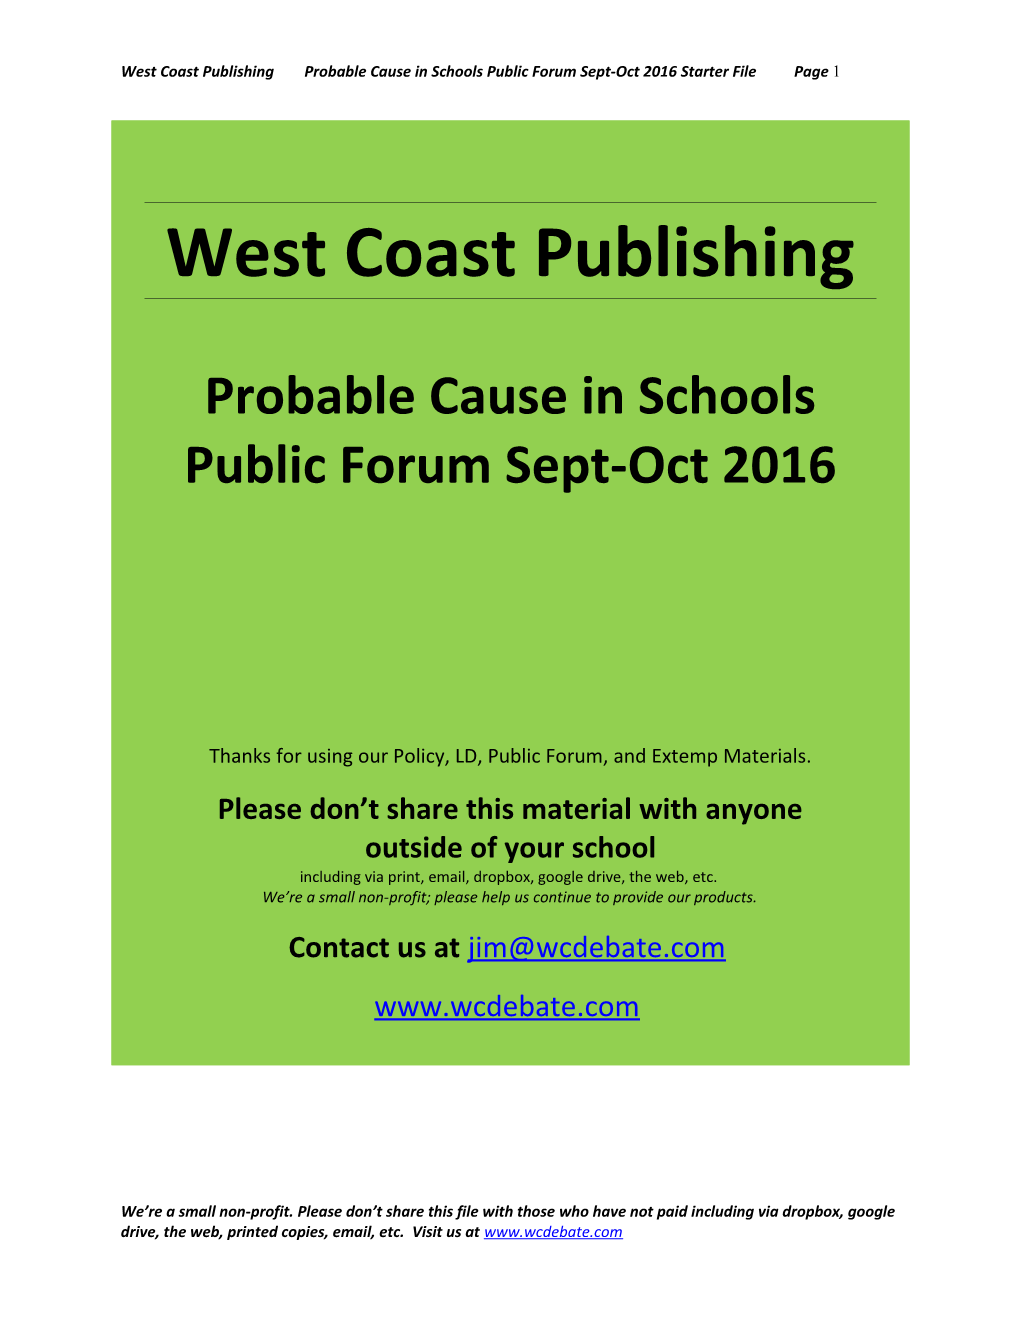 West Coast Publishing Probable Cause in Schools Public Forum Sept-Oct 2016 Starter File Page 3